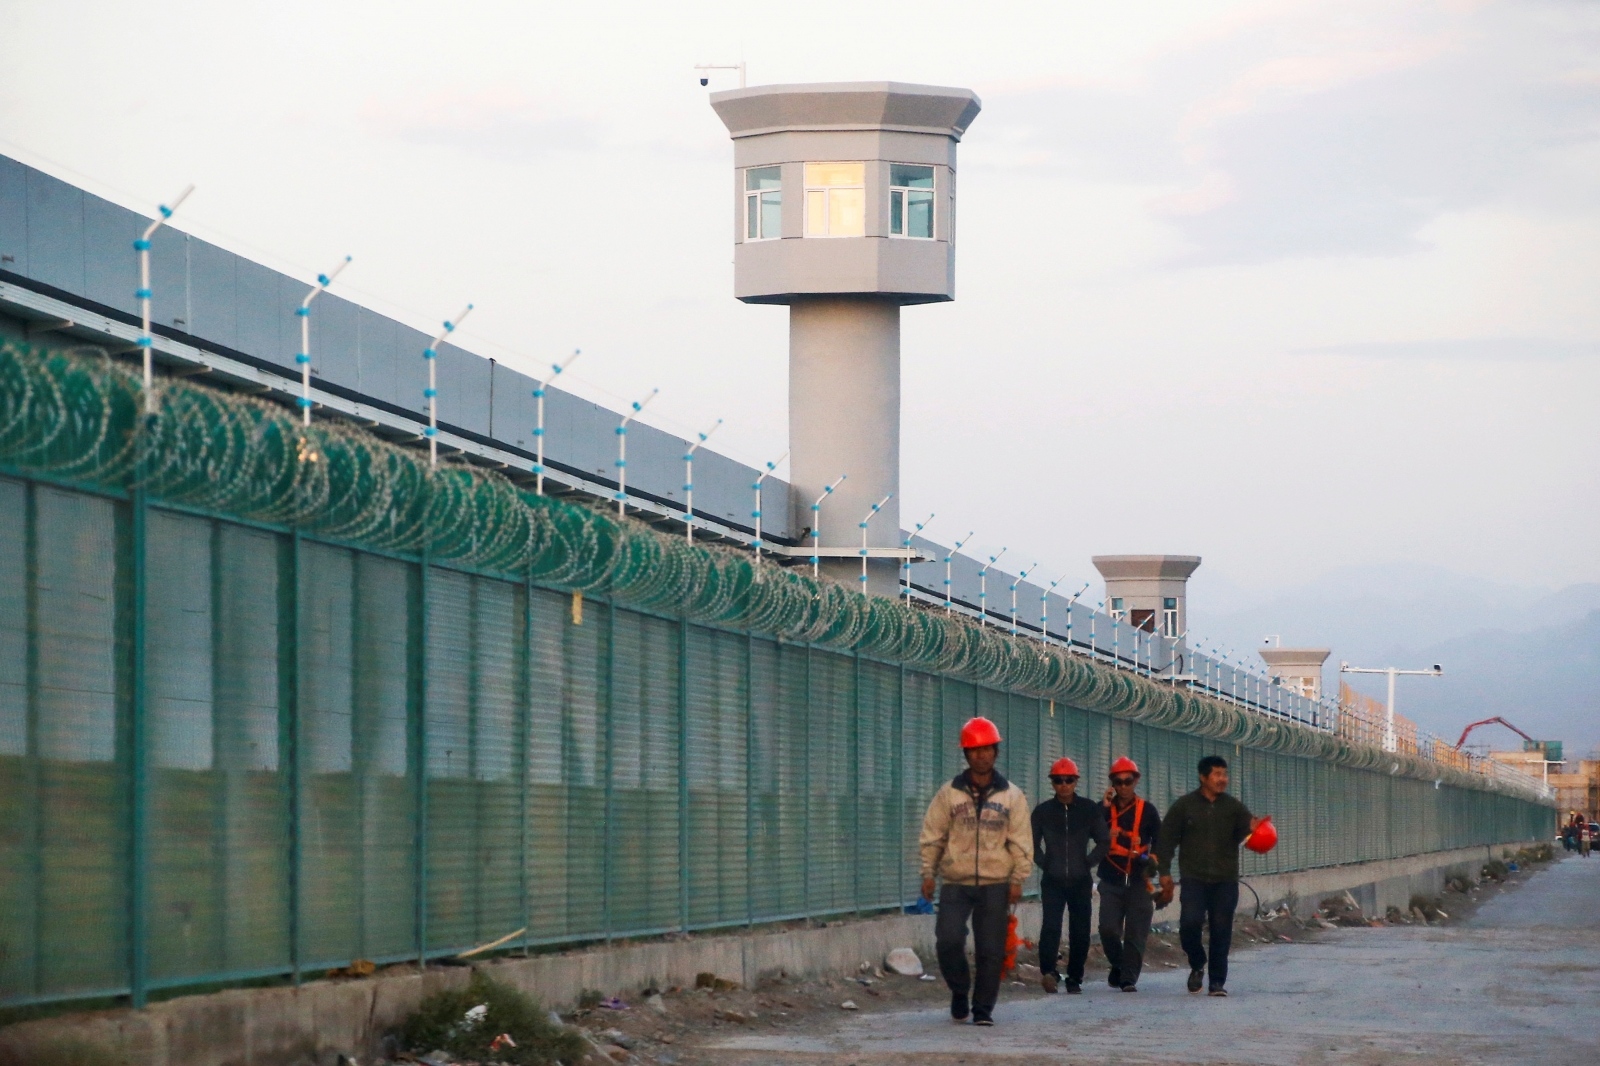 FILE PHOTO: Workers walk by the perimeter fence of what is officially known as a vocational skills education centre in Dabancheng FILE PHOTO: Workers walk by the perimeter fence of what is officially known as a vocational skills education centre in Dabancheng in Xinjiang Uighur Autonomous Region, China September 4, 2018. This centre, situated between regional capital Urumqi and tourist spot Turpan, is among the largest known ones, and was still undergoing extensive construction and expansion at the time the photo was taken. Picture taken September 4, 2018. REUTERS/Thomas Peter/File Photo Thomas Peter